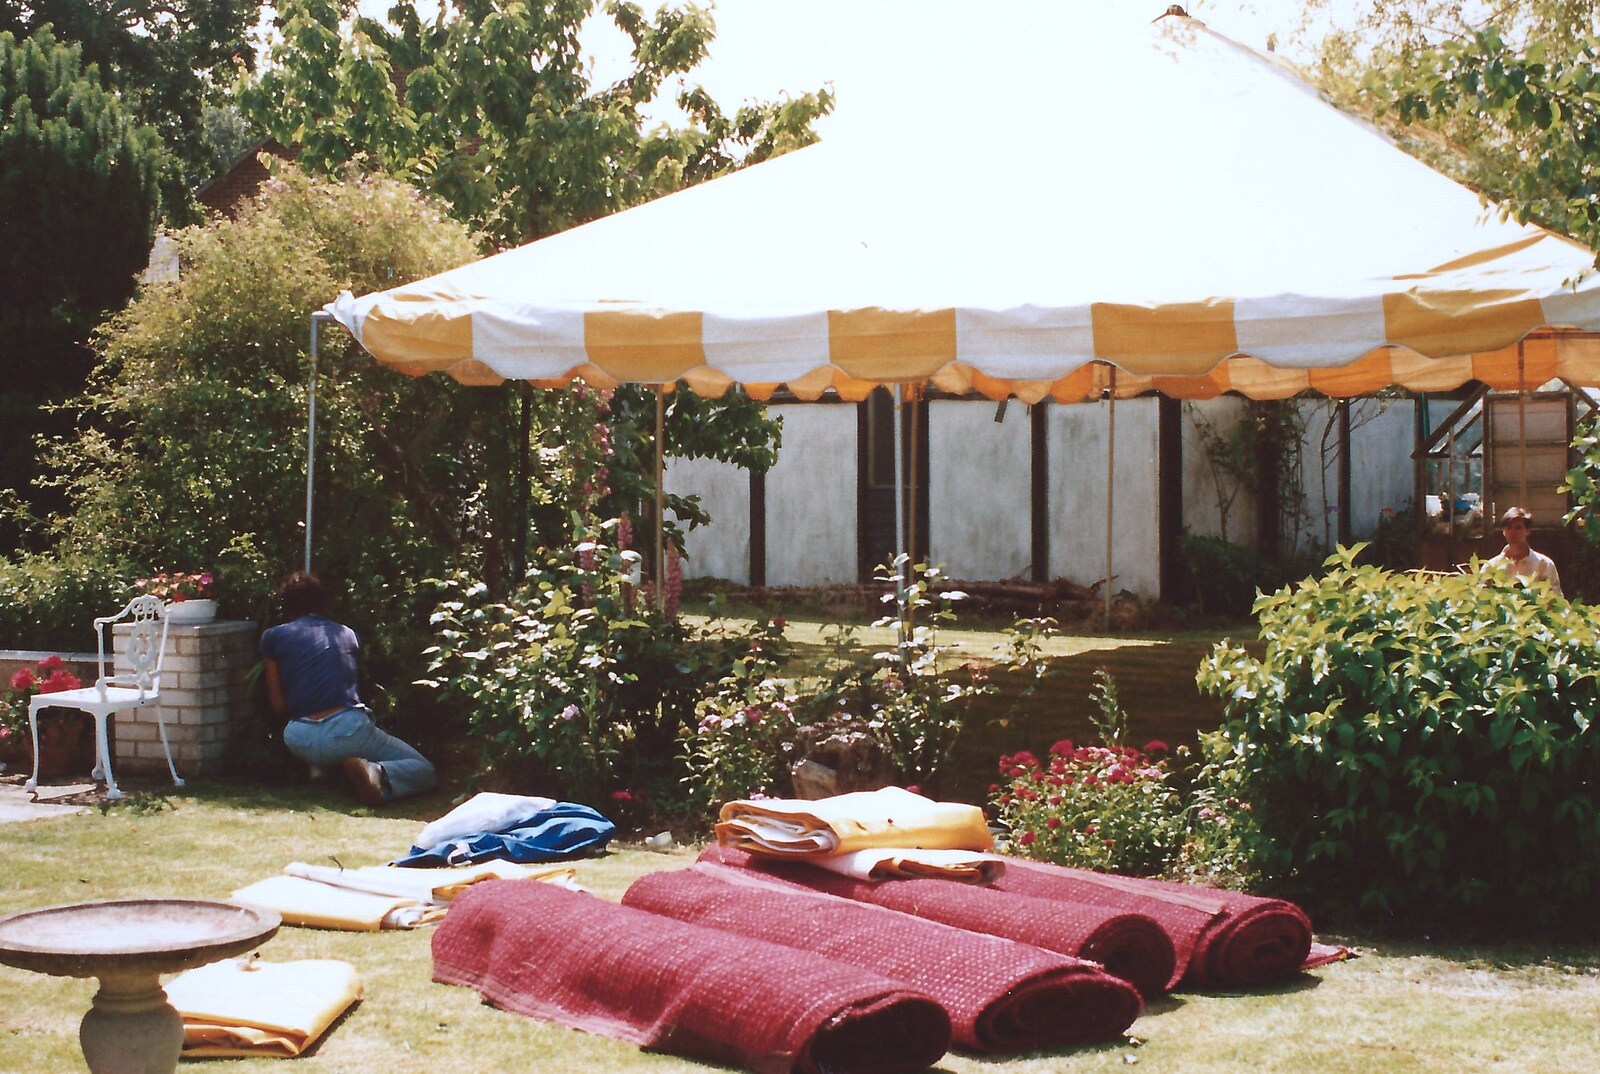 Rolls of carpet on the lawn from Mother and Mike's Wedding Reception, Bransgore, Dorset - 20th August 1988